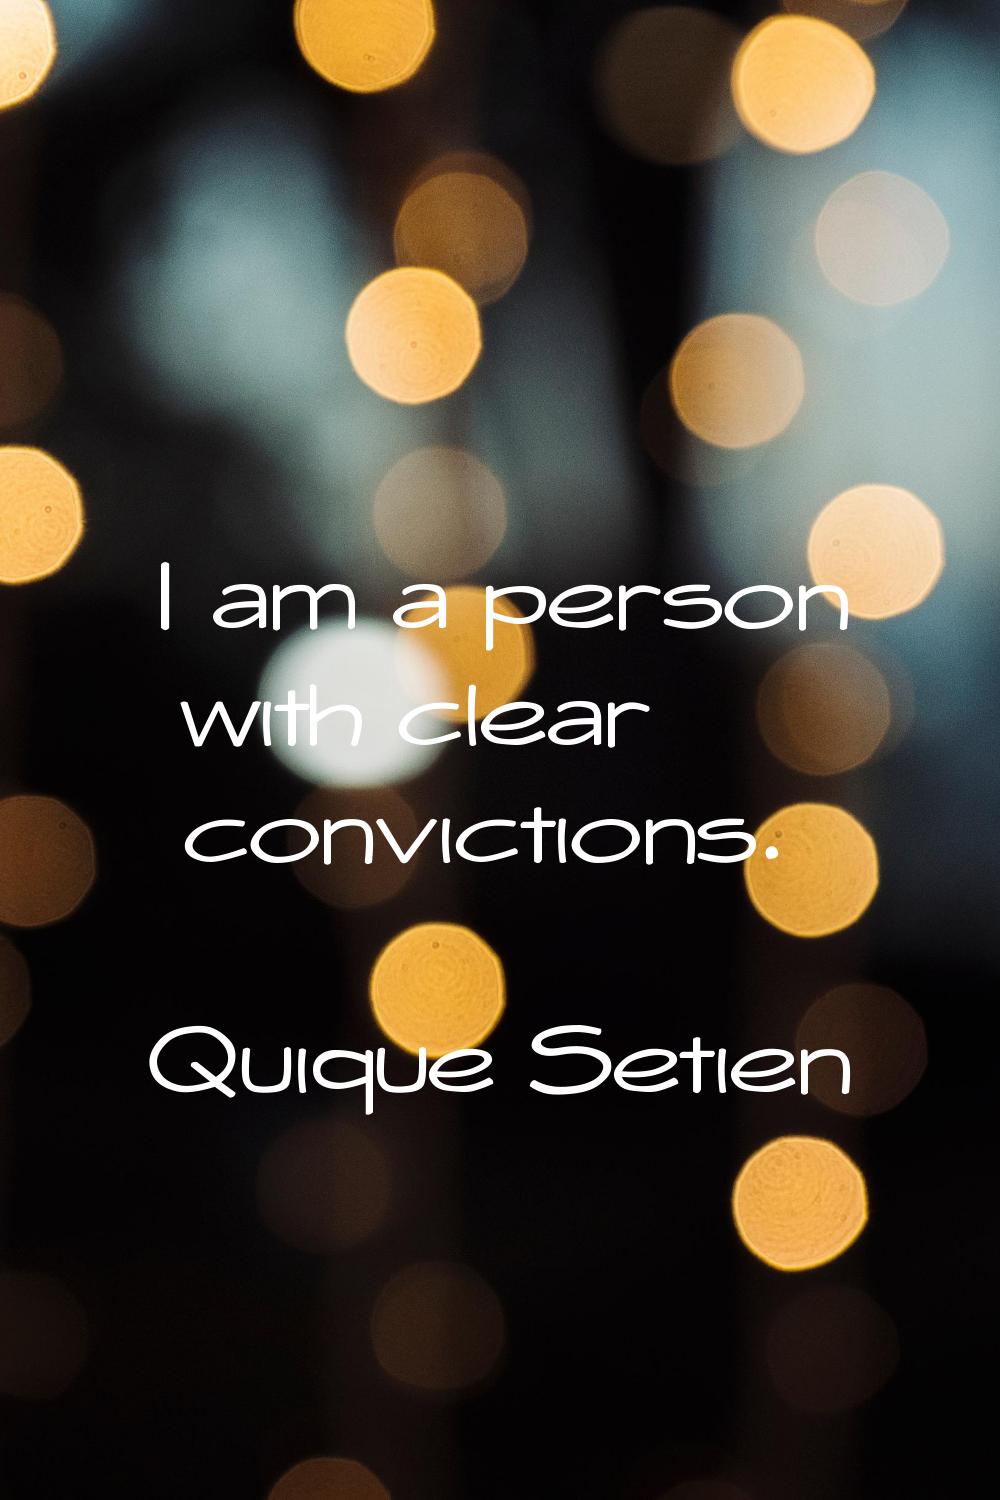 I am a person with clear convictions.